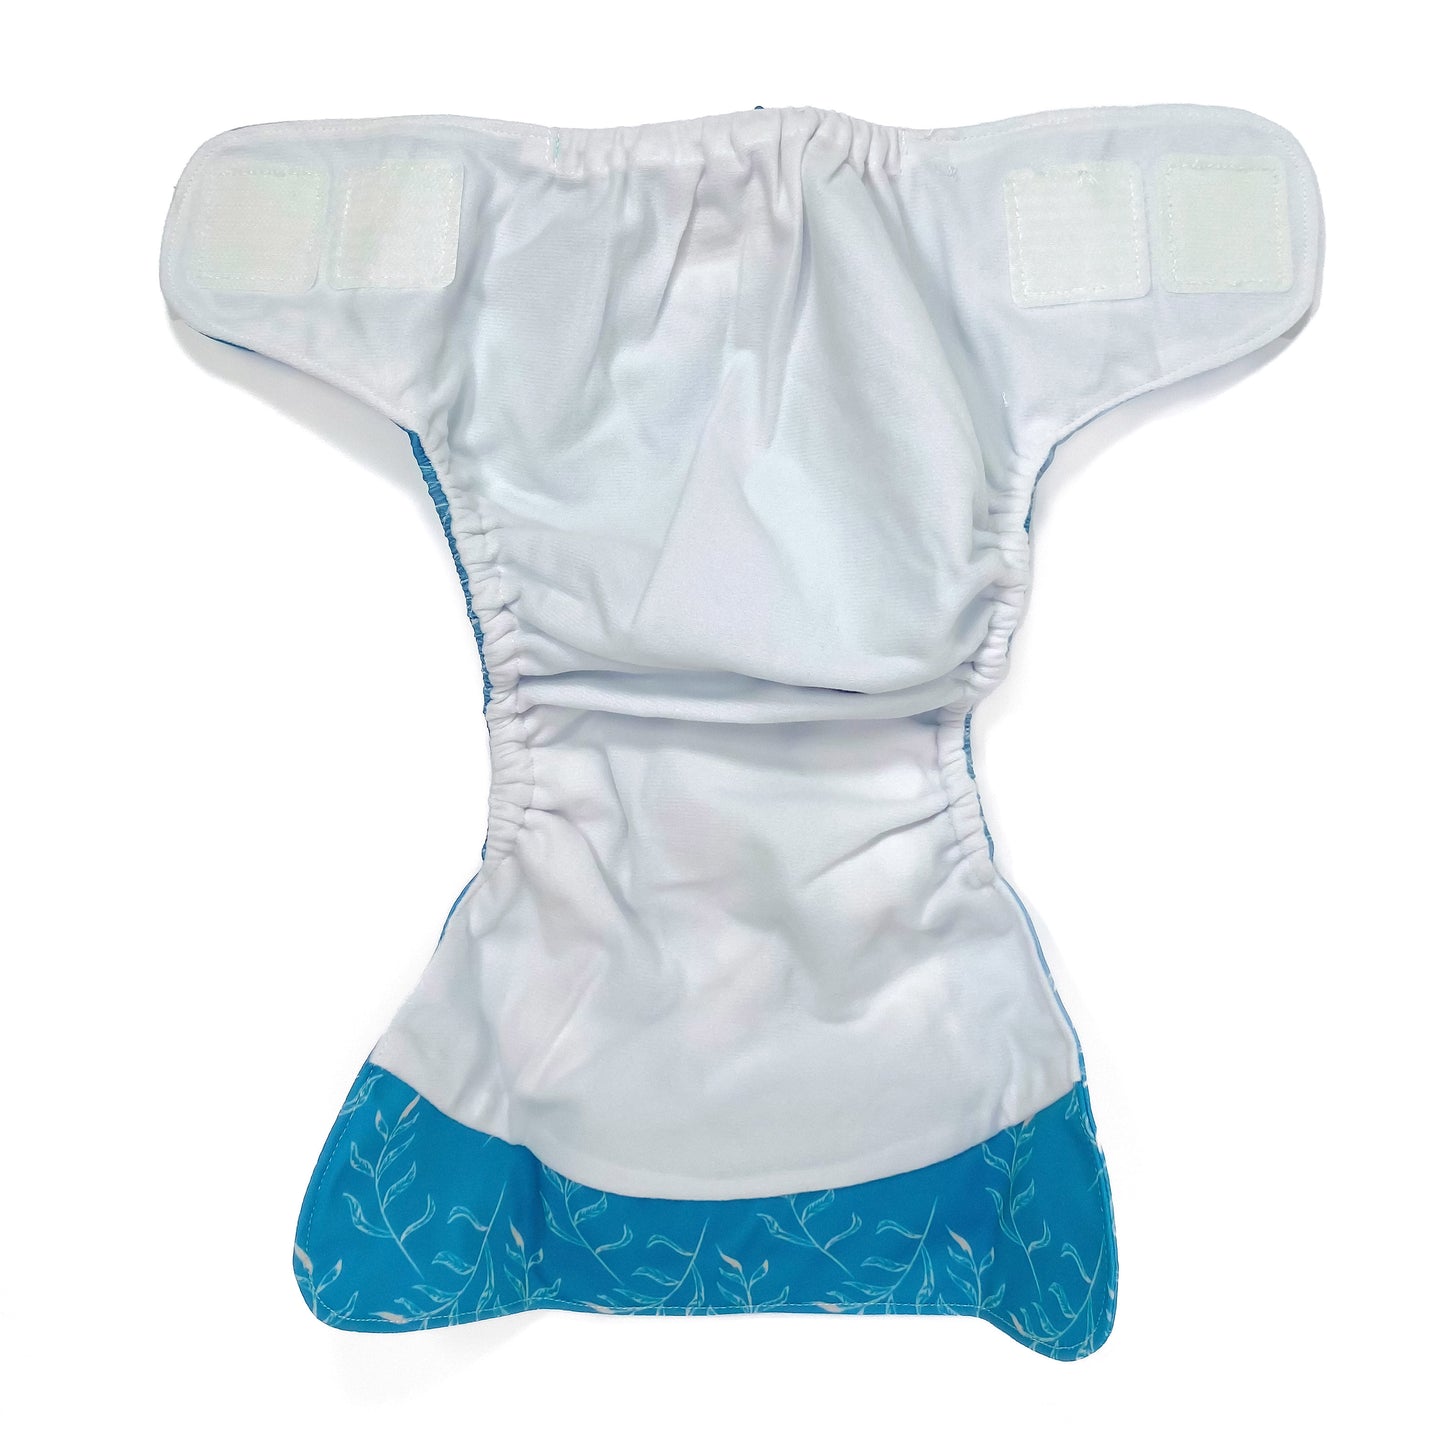 An adjustable reusable nappy for babies and toddlers, featuring a blue fern design, with images of white fern leaves on a blue background. View shows the inside fabric of the nappy.